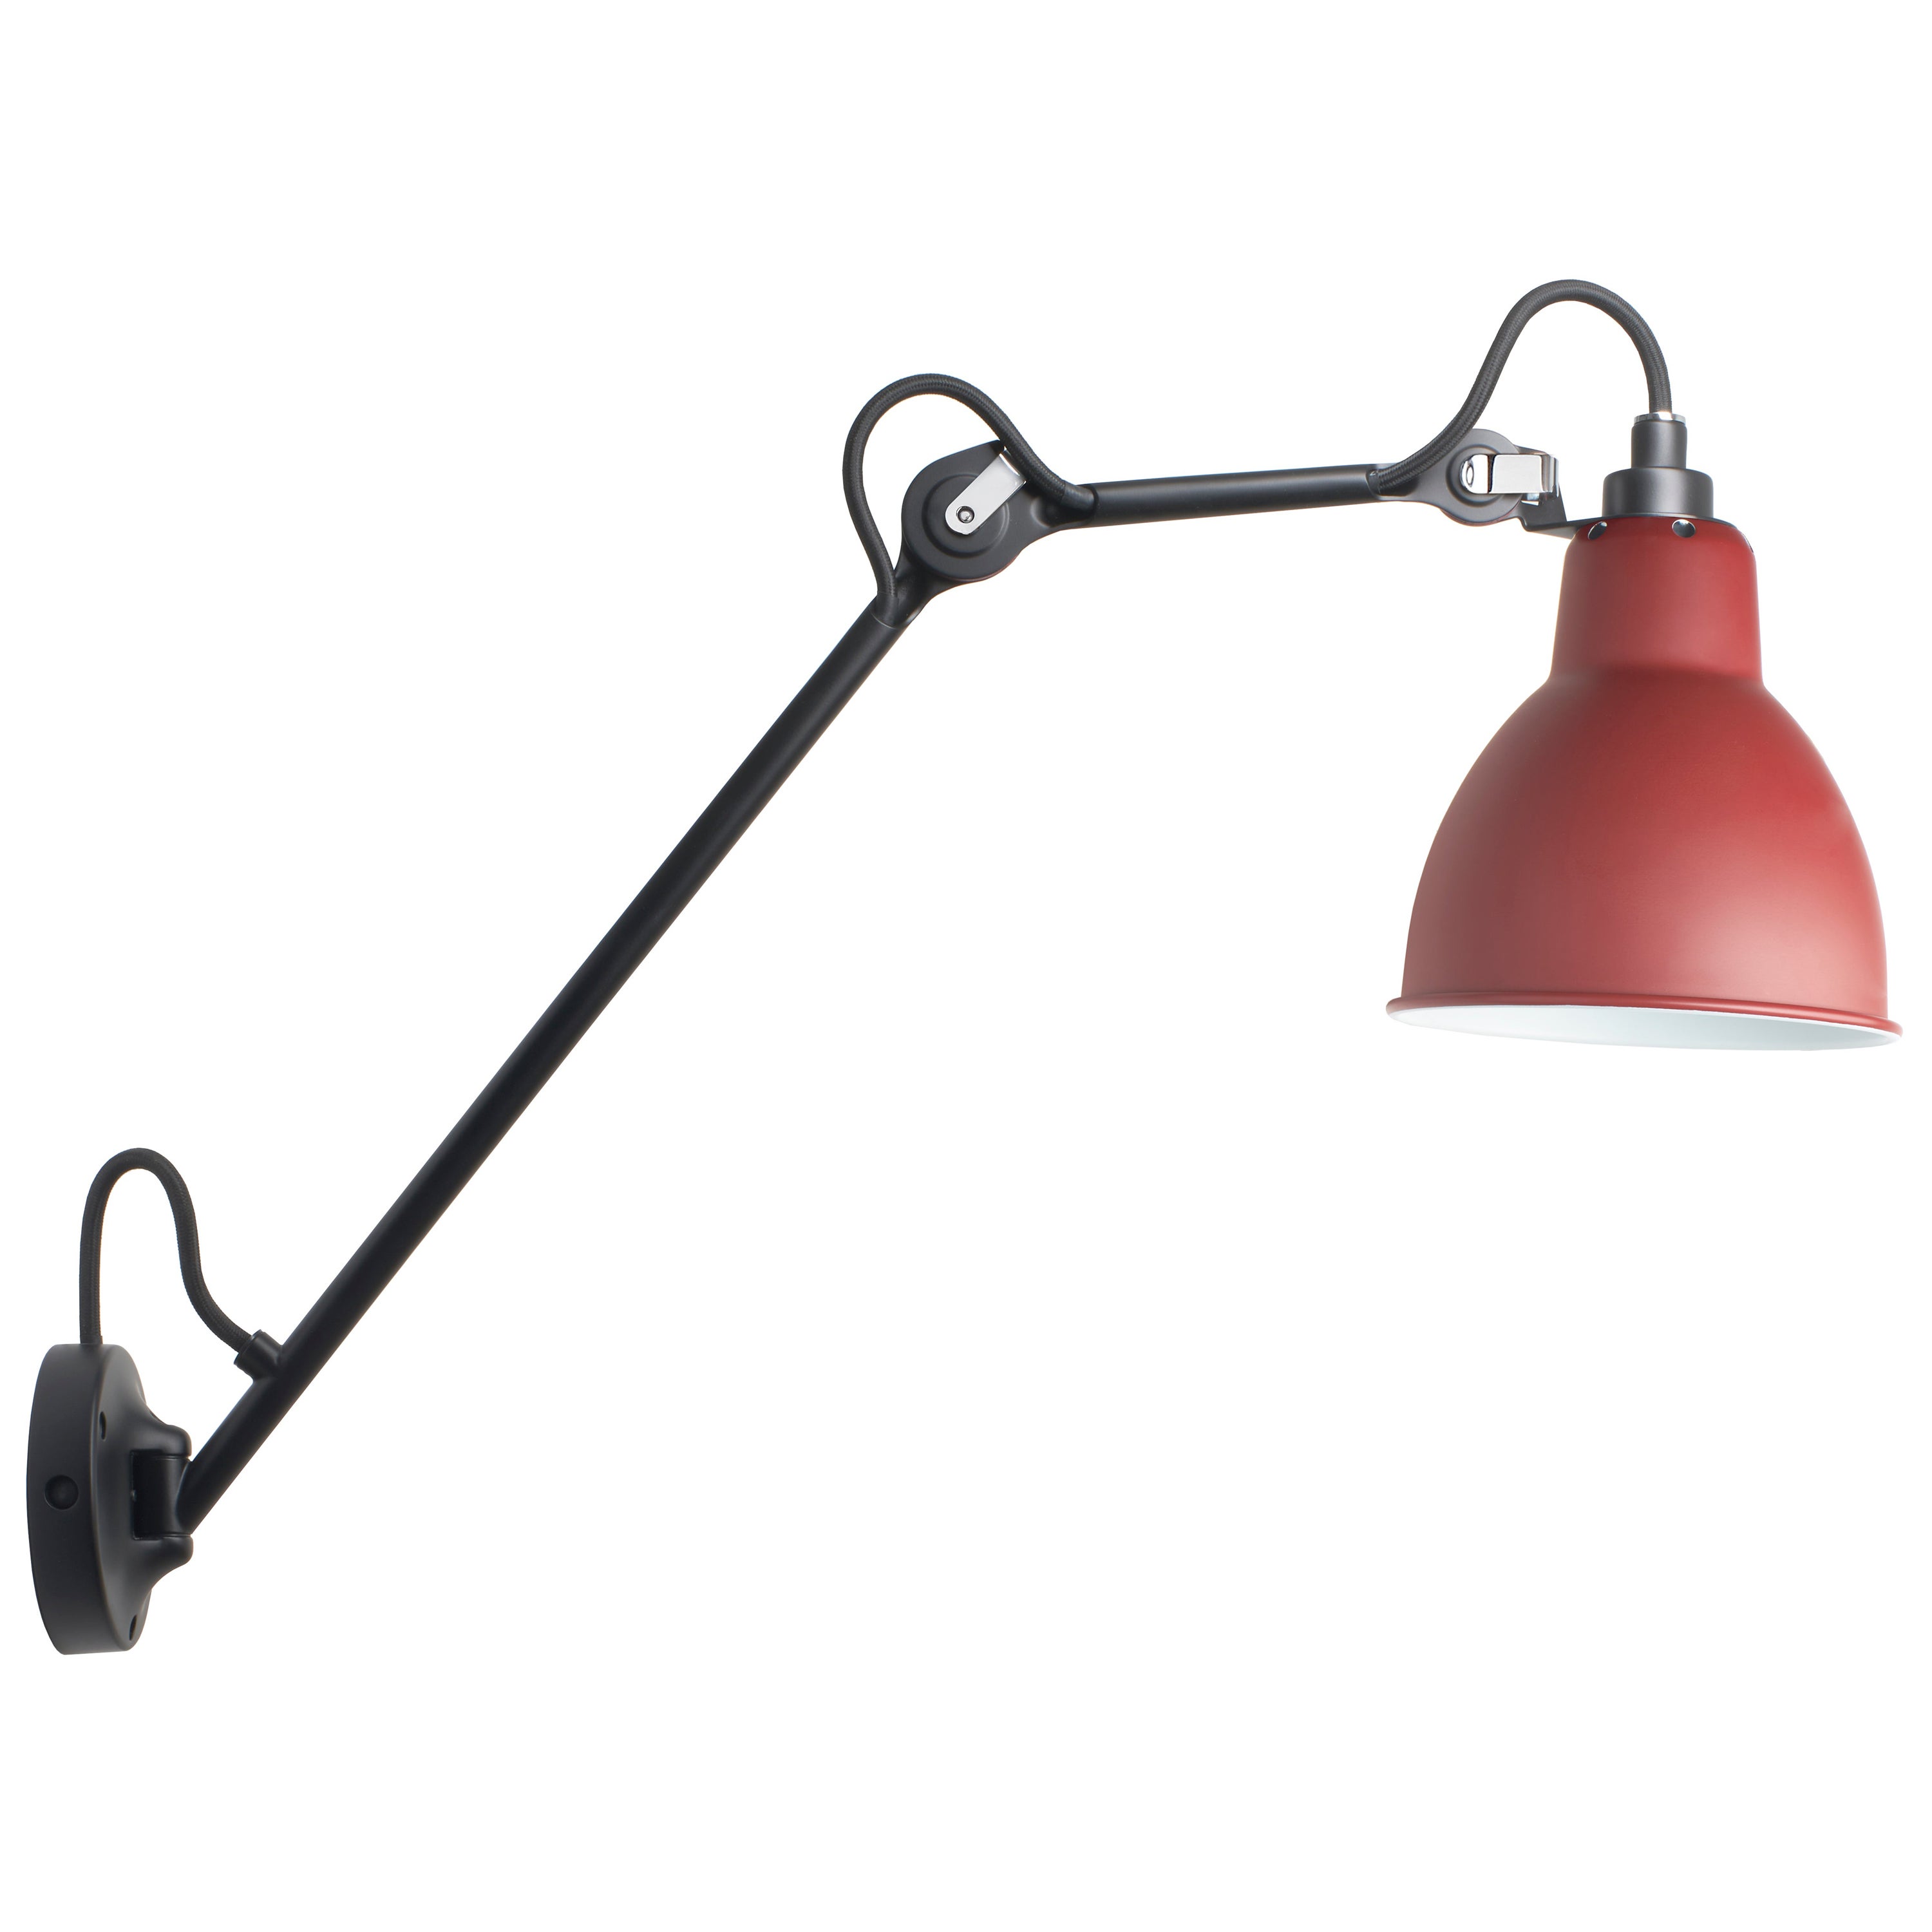 DCW Editions La Lampe Gras N°122 Wall Lamp in Black Arm and Red Shade For Sale